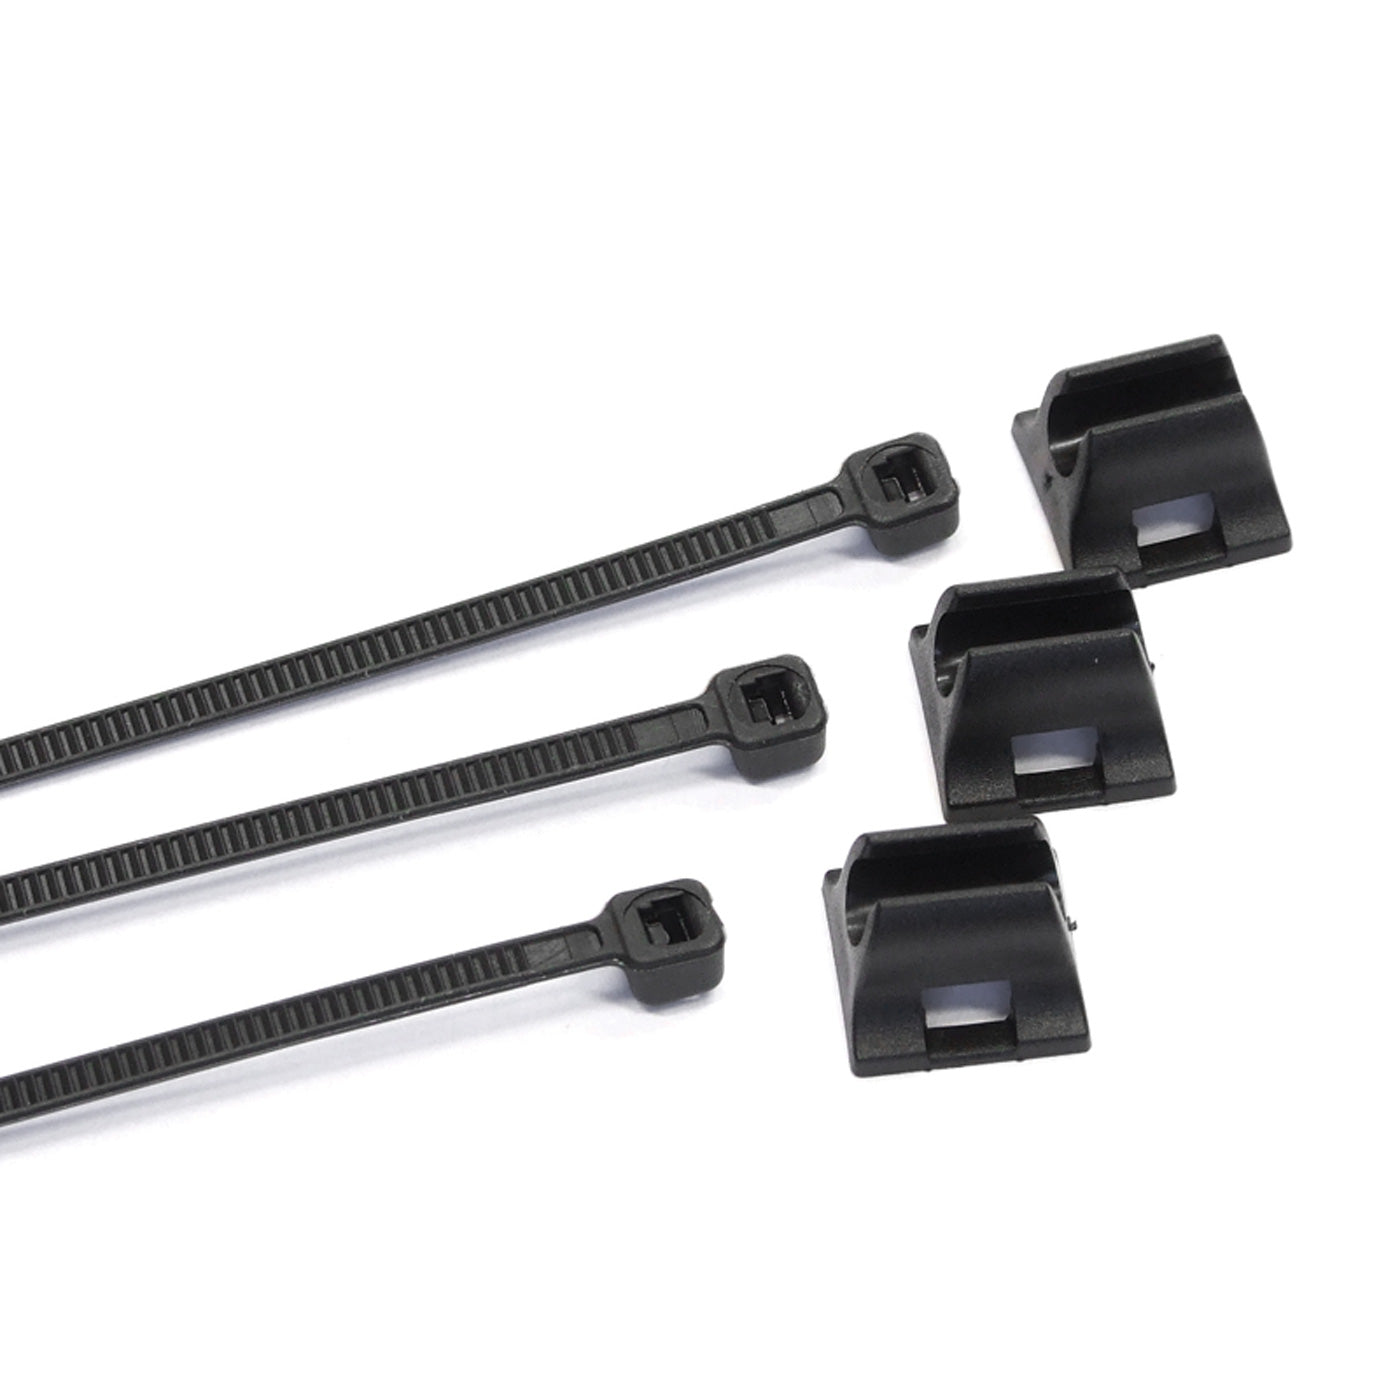 View Cable ties and clips information